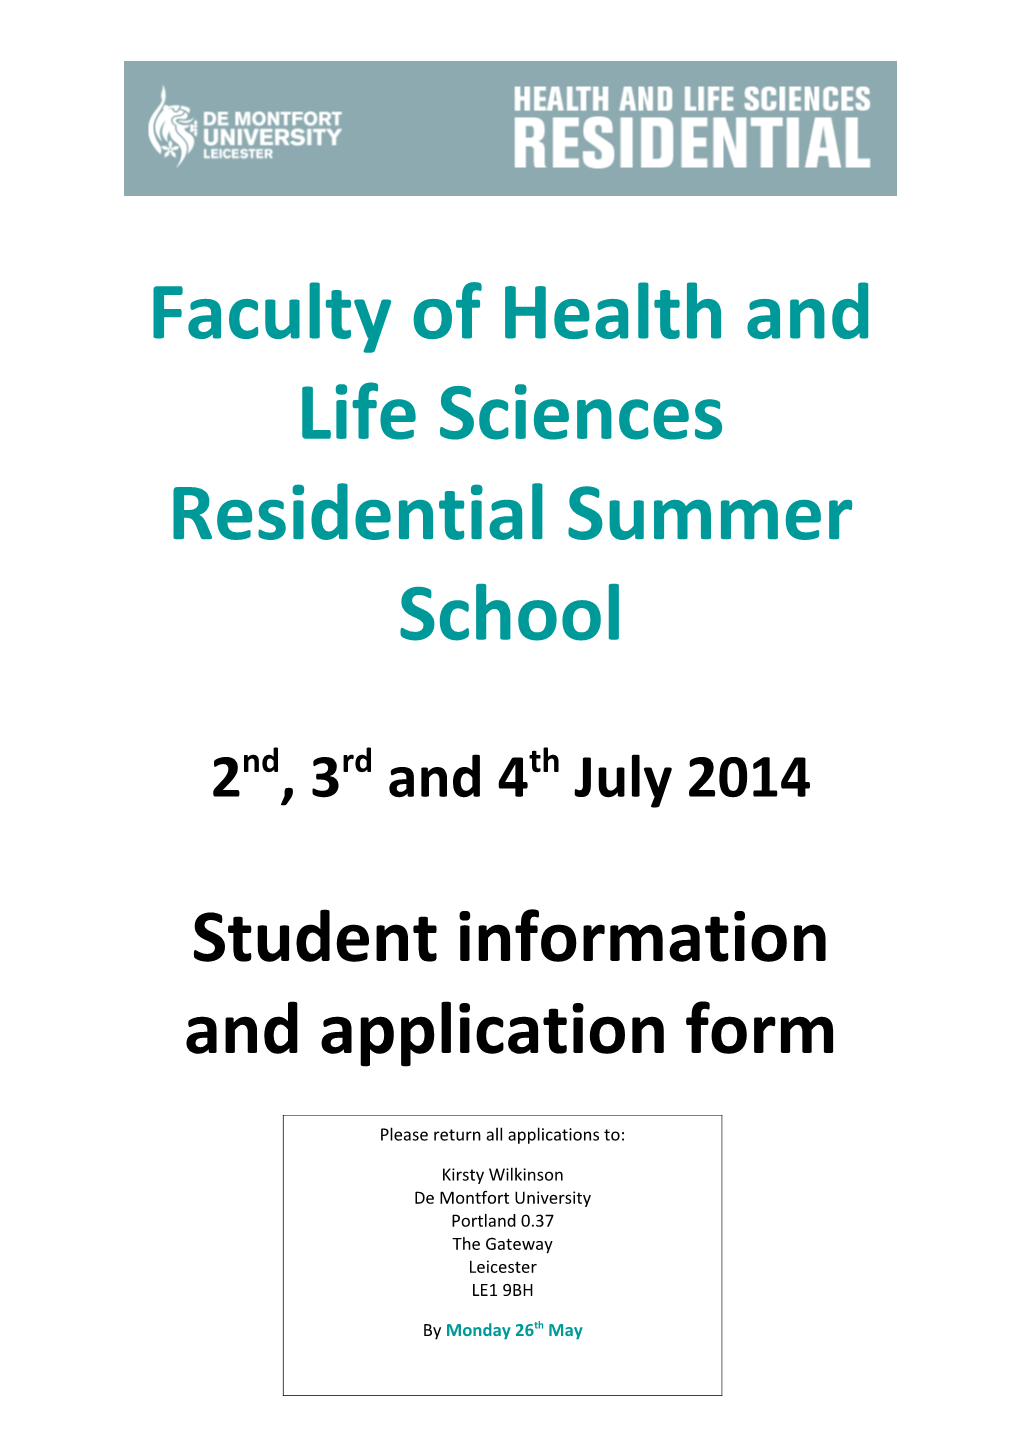 Faculty of Health and Life Sciences Residential Summer School